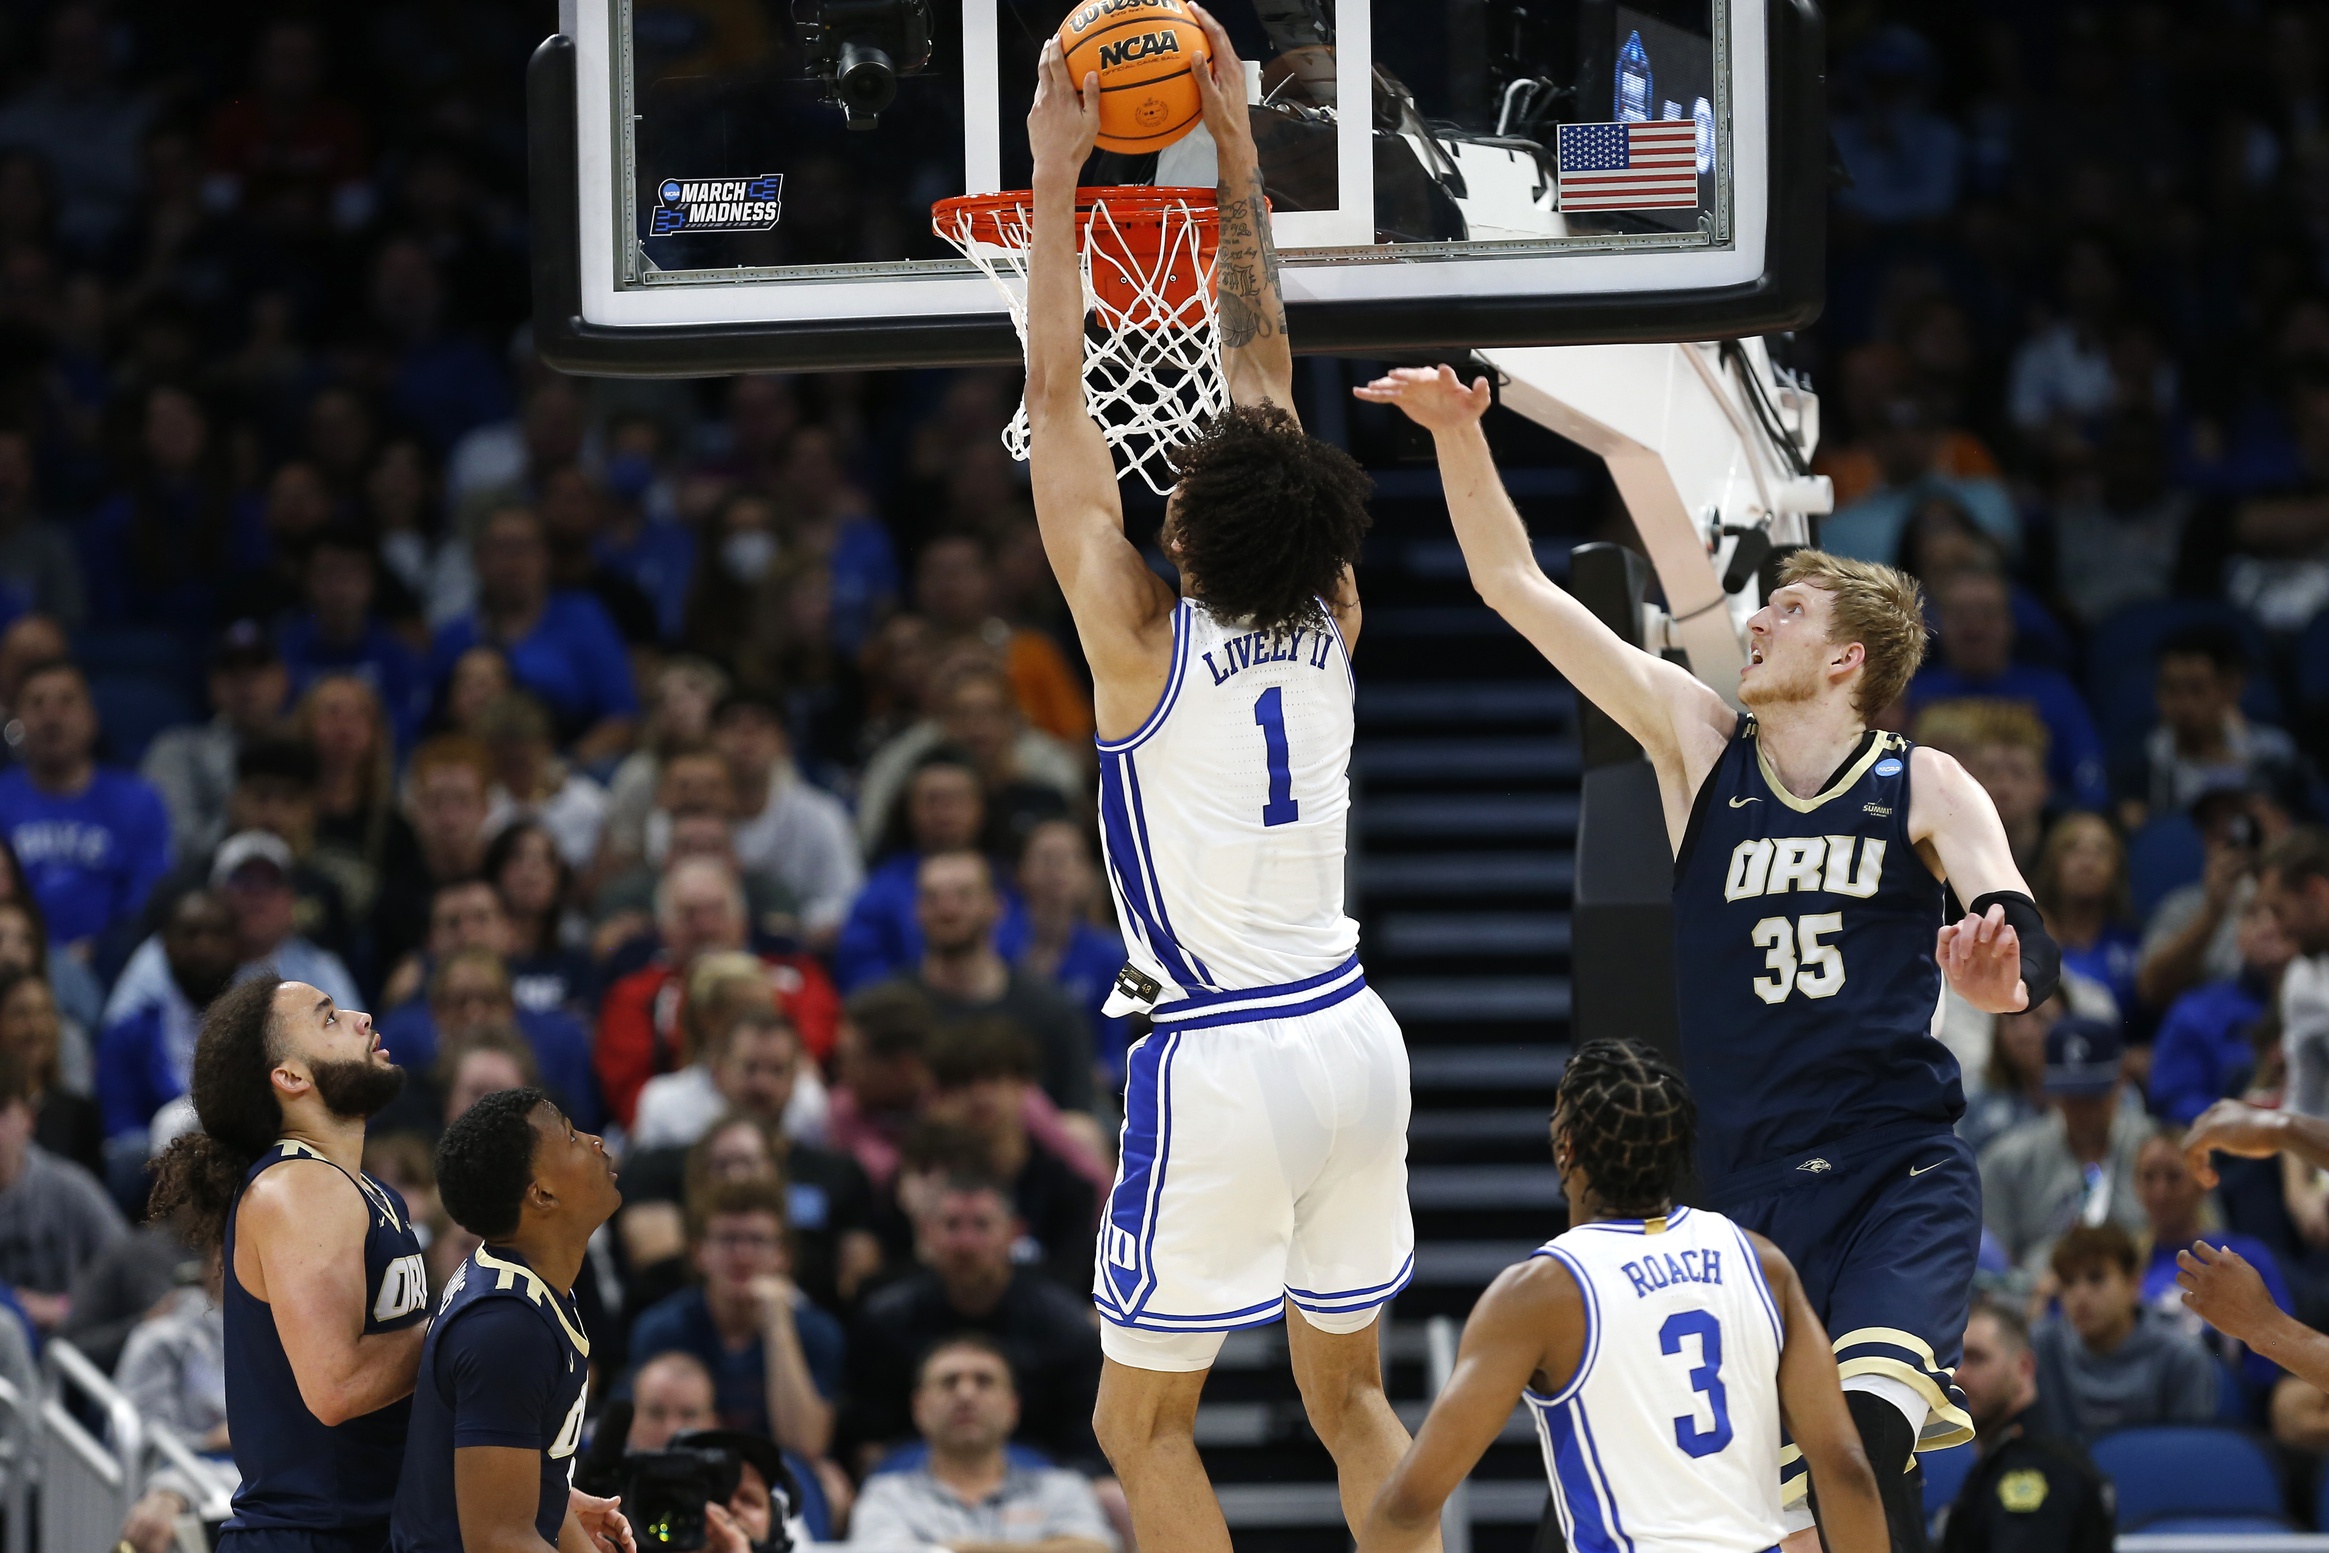 Mar 16, 2023; Orlando, FL, USA; Duke Blue Devils center Dereck Lively II (1) dunks the ball past Oral Roberts Golden Eagles forward Connor Vanover (35) during the first half at Amway Center. Mandatory Credit: Russell Lansford-USA TODAY Sports